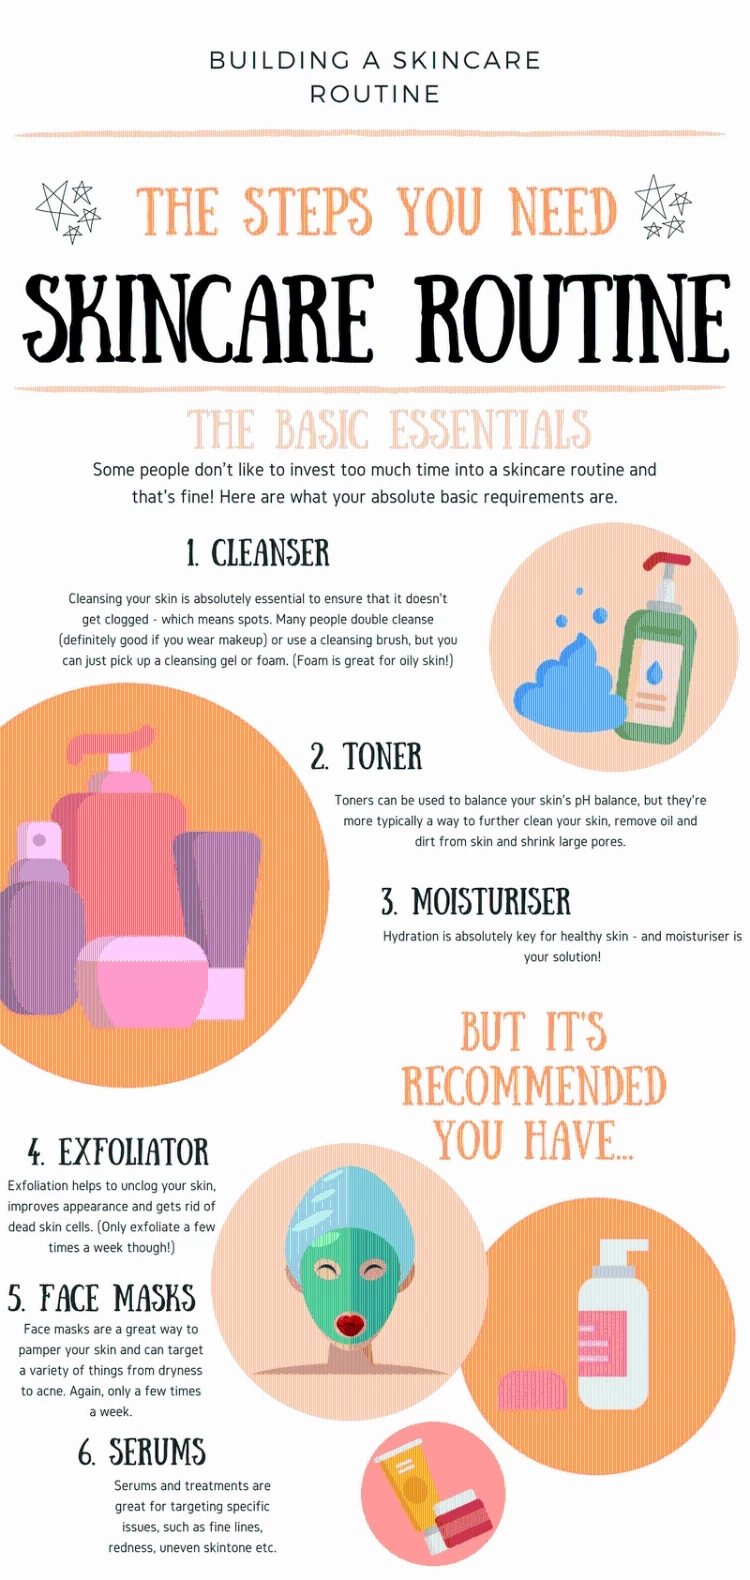 Skincare Routine INFOGRAPHIC - How To Build A Skincare Routine